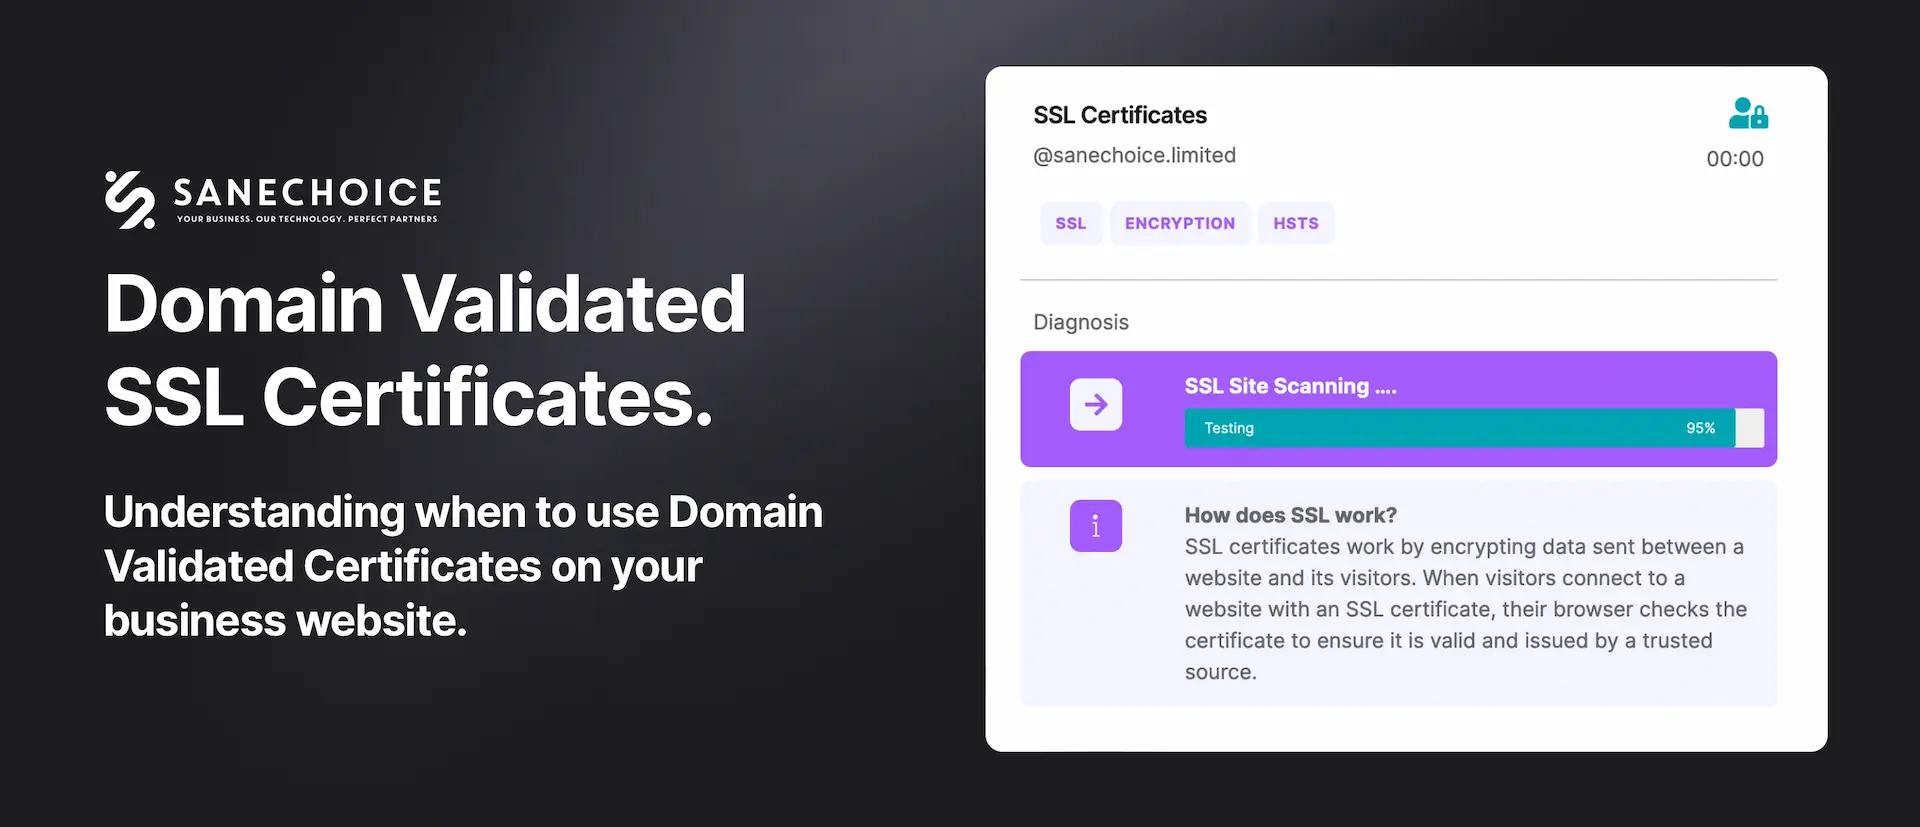 Understanding when to use domain validated ssl on your business website.